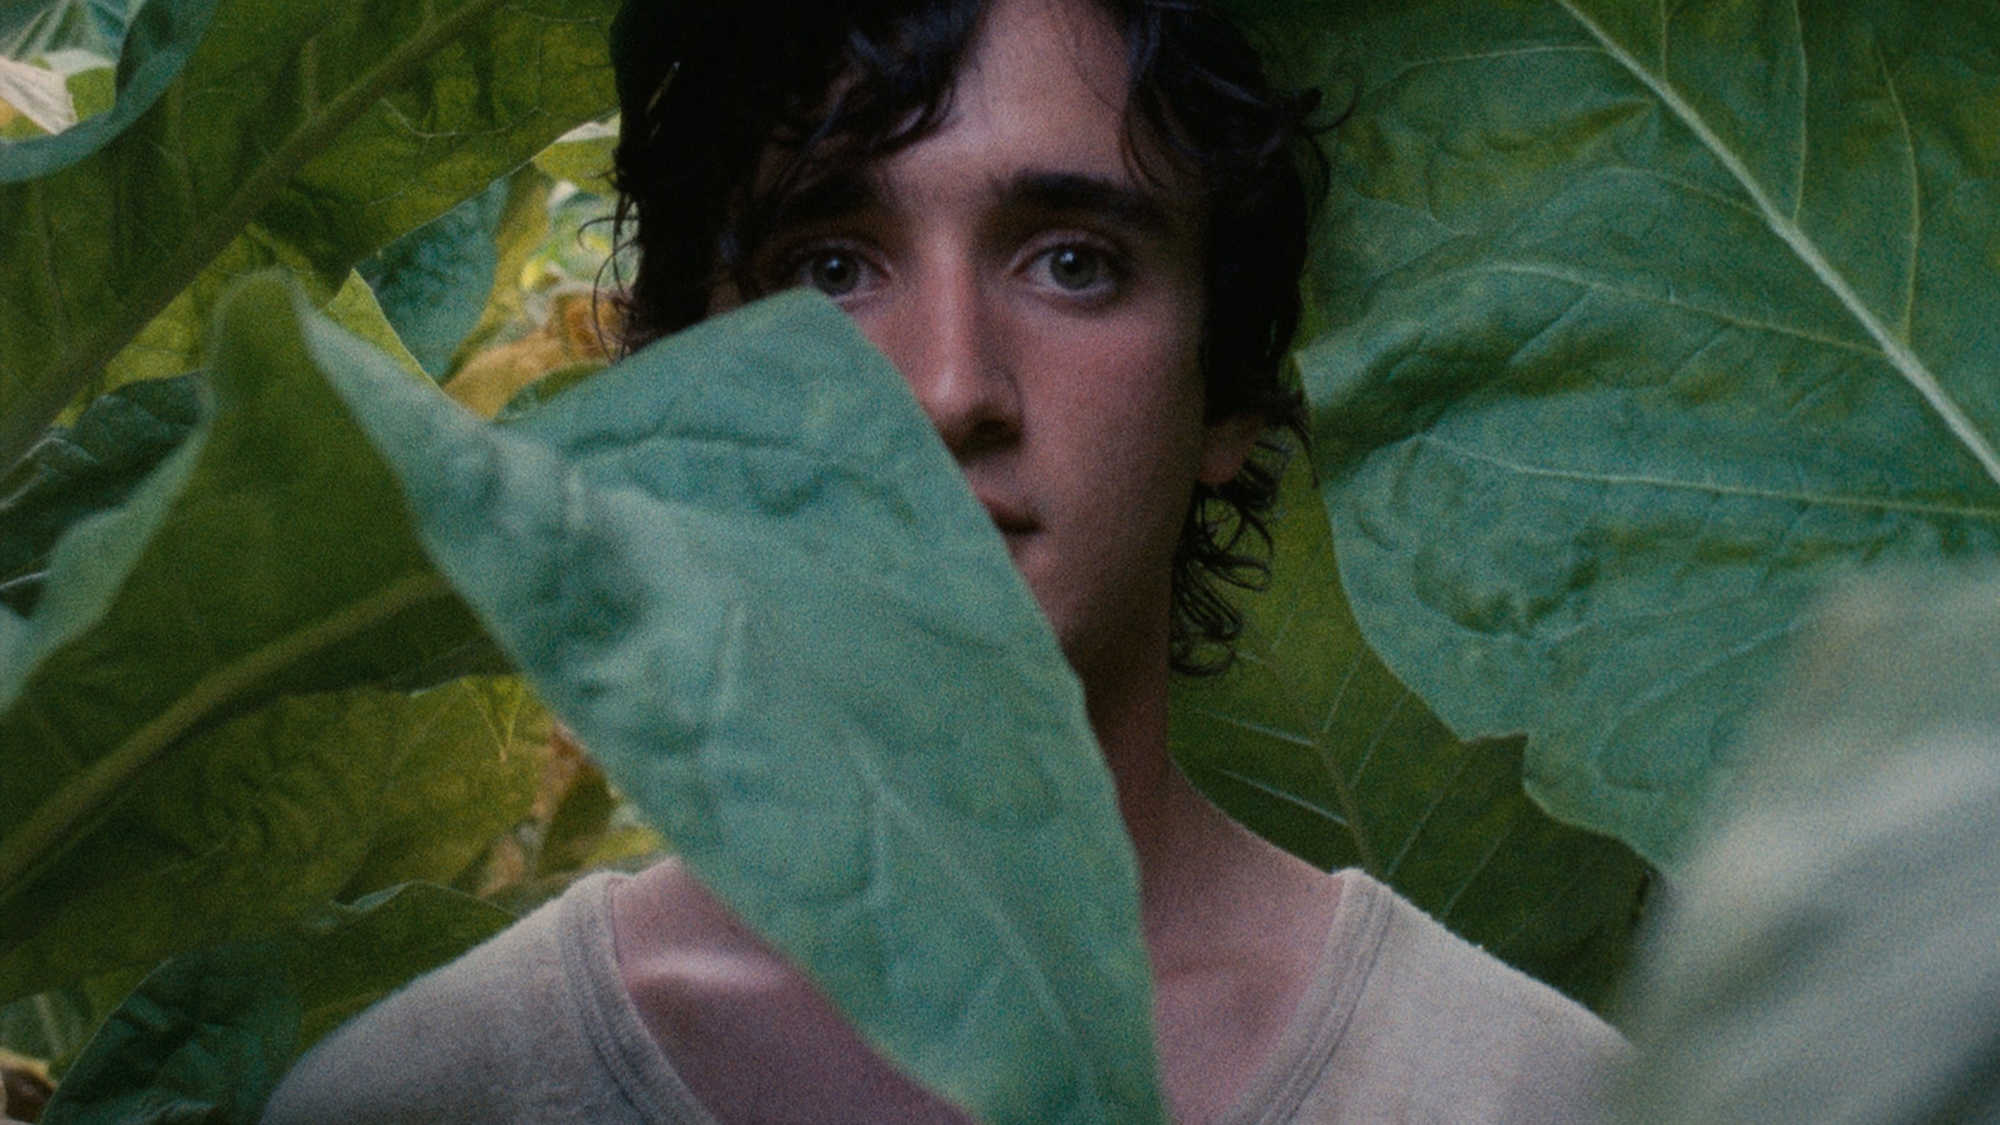 Adriano Tardiolo stars in Happy As Lazzaro, which is now on Netflix.